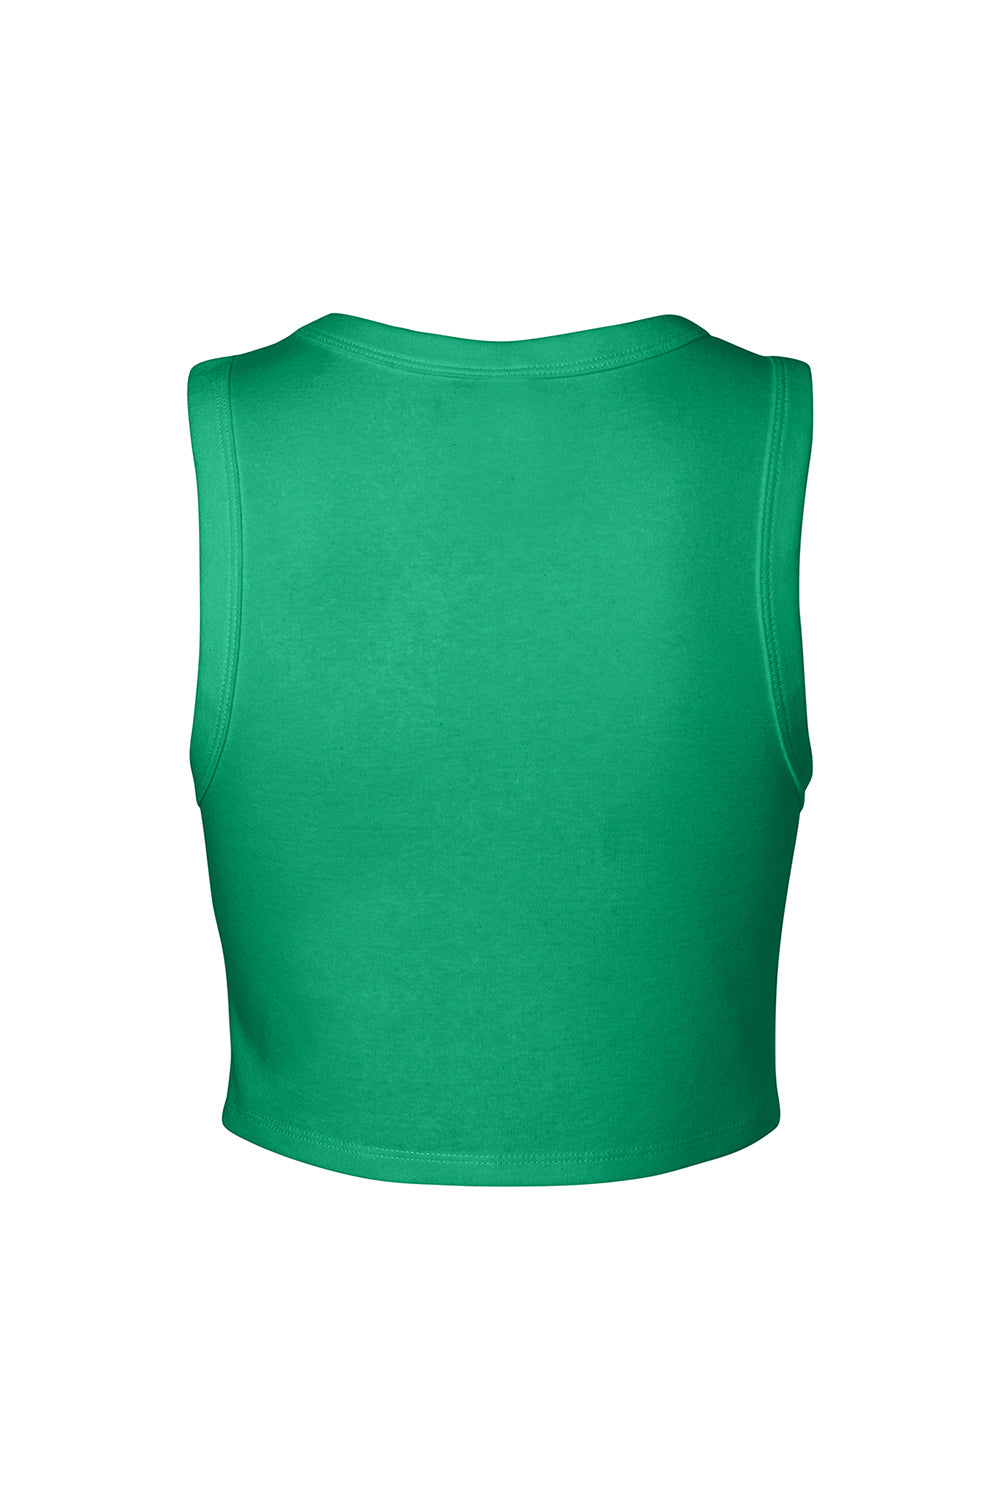 Bella + Canvas 1013BE Womens Micro Ribbed Muscle Crop Tank Top Kelly Green Flat Back